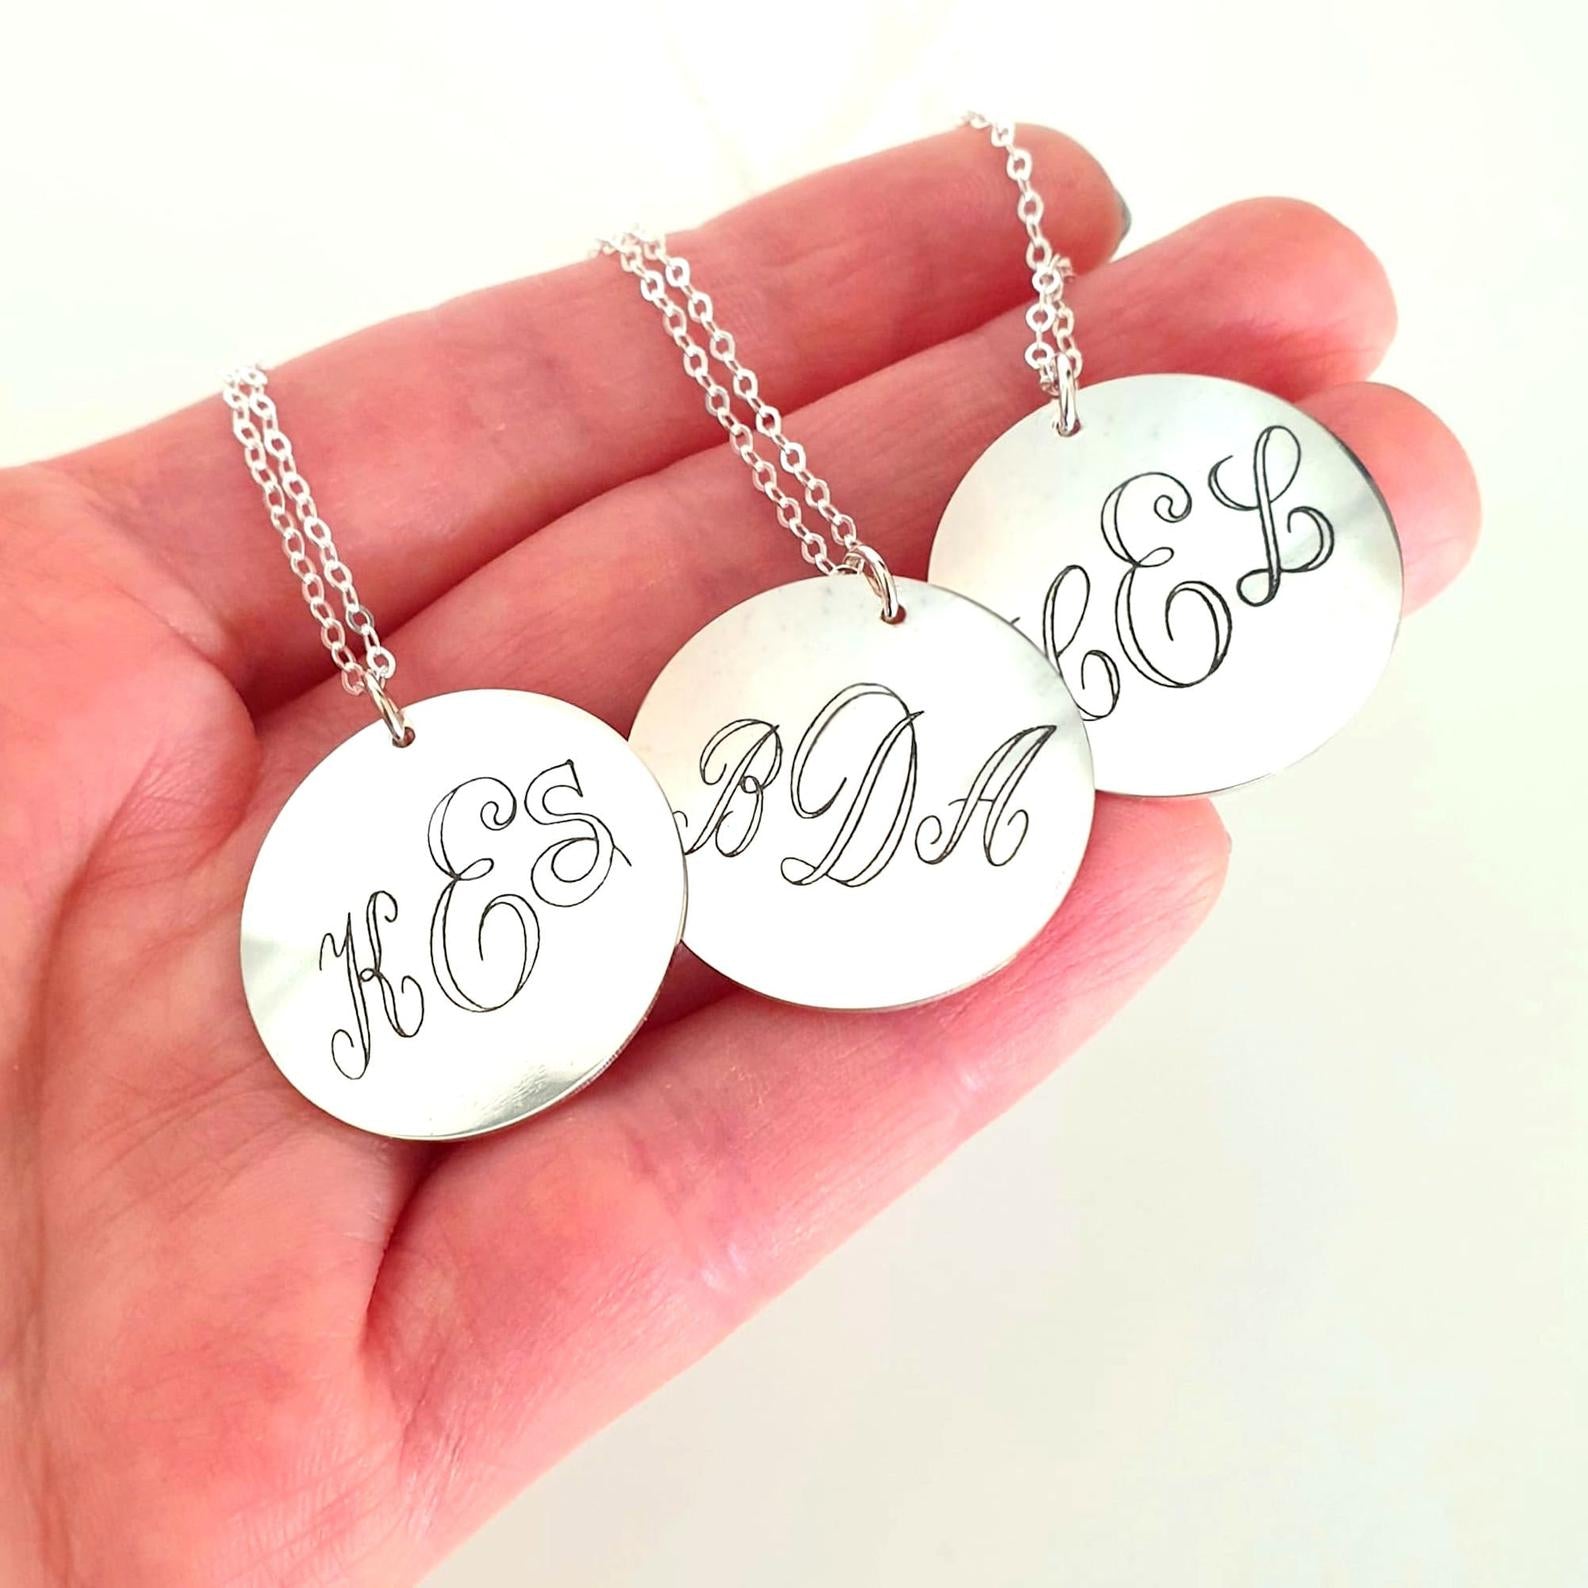 Personalized Monogram Necklace - Bridesmaids Gift - Initial Necklace 20 inch (50 cm)